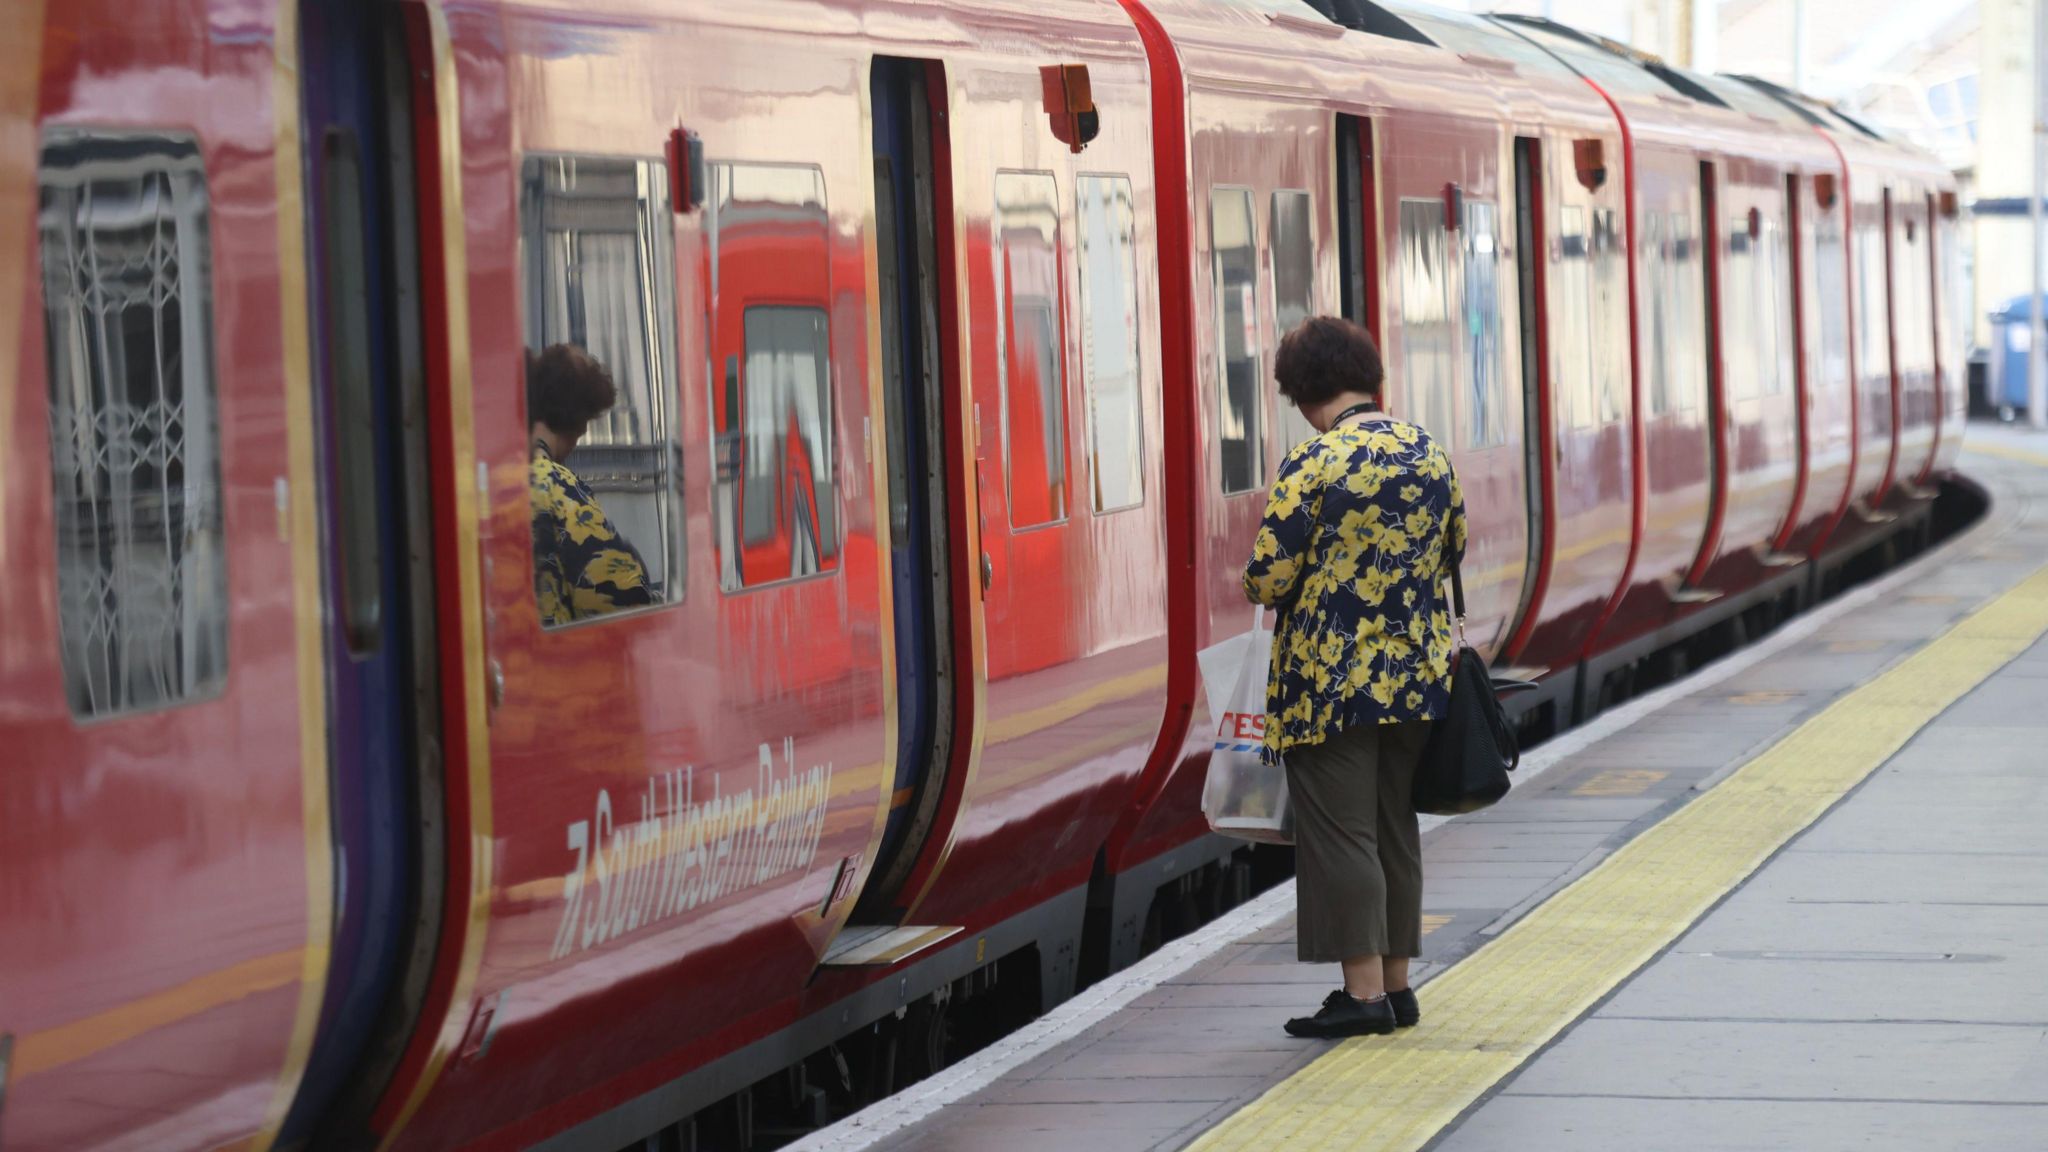 A woman stands on a platform waiting to board a South Western Railway service, in a red livery